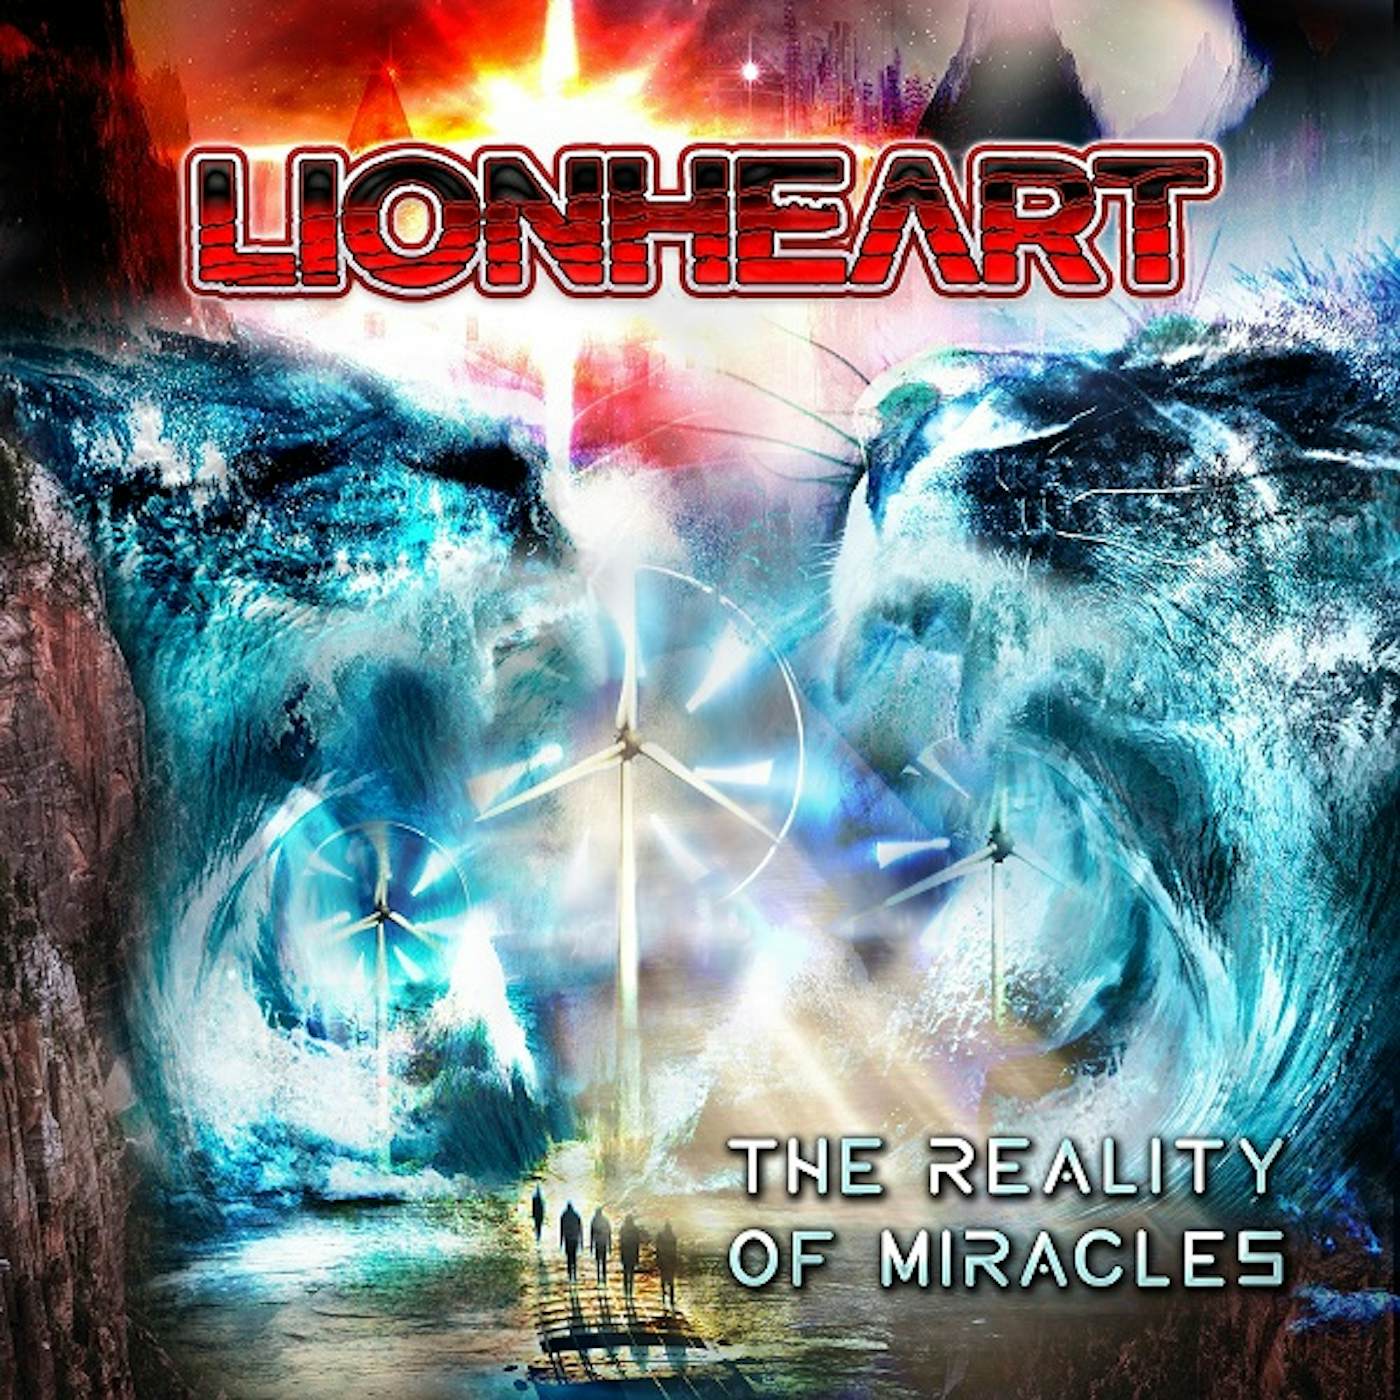 Lionheart REALITY OF MIRACLES Vinyl Record